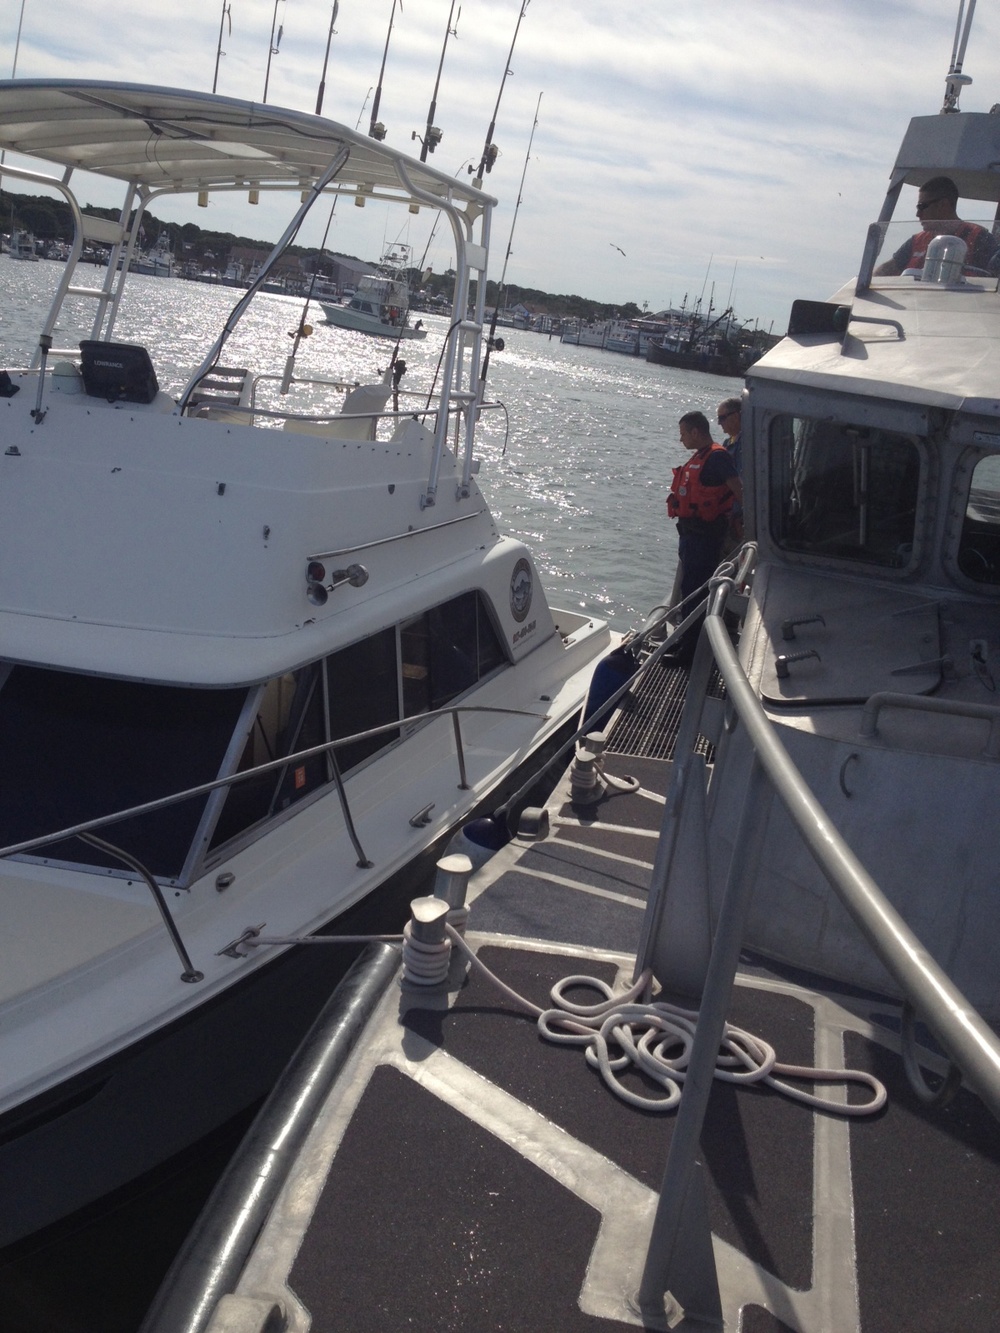 Coast Guard responds to fishing vessel taking on water off Montauk